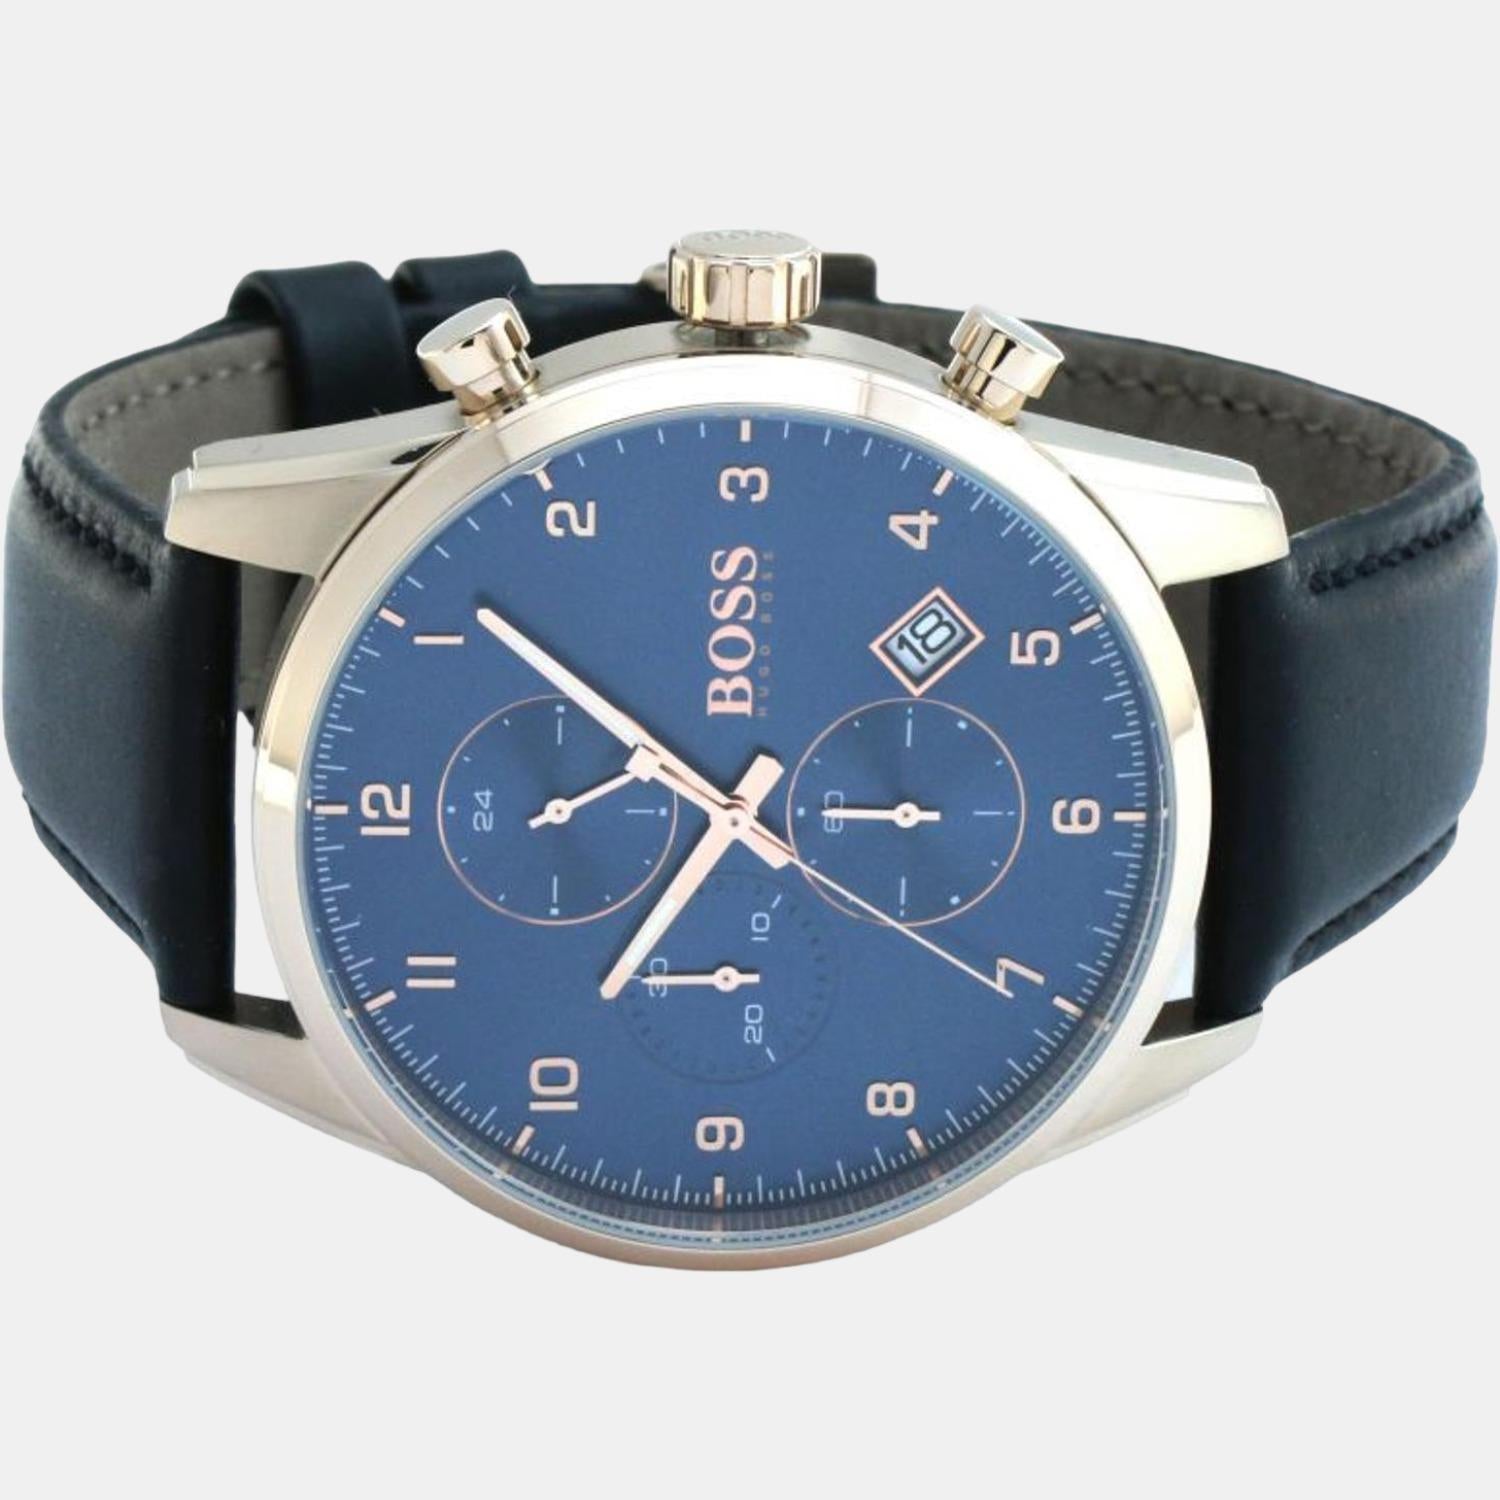 Watch Time Boss Just – Blue Analog In Boss Male Leather |